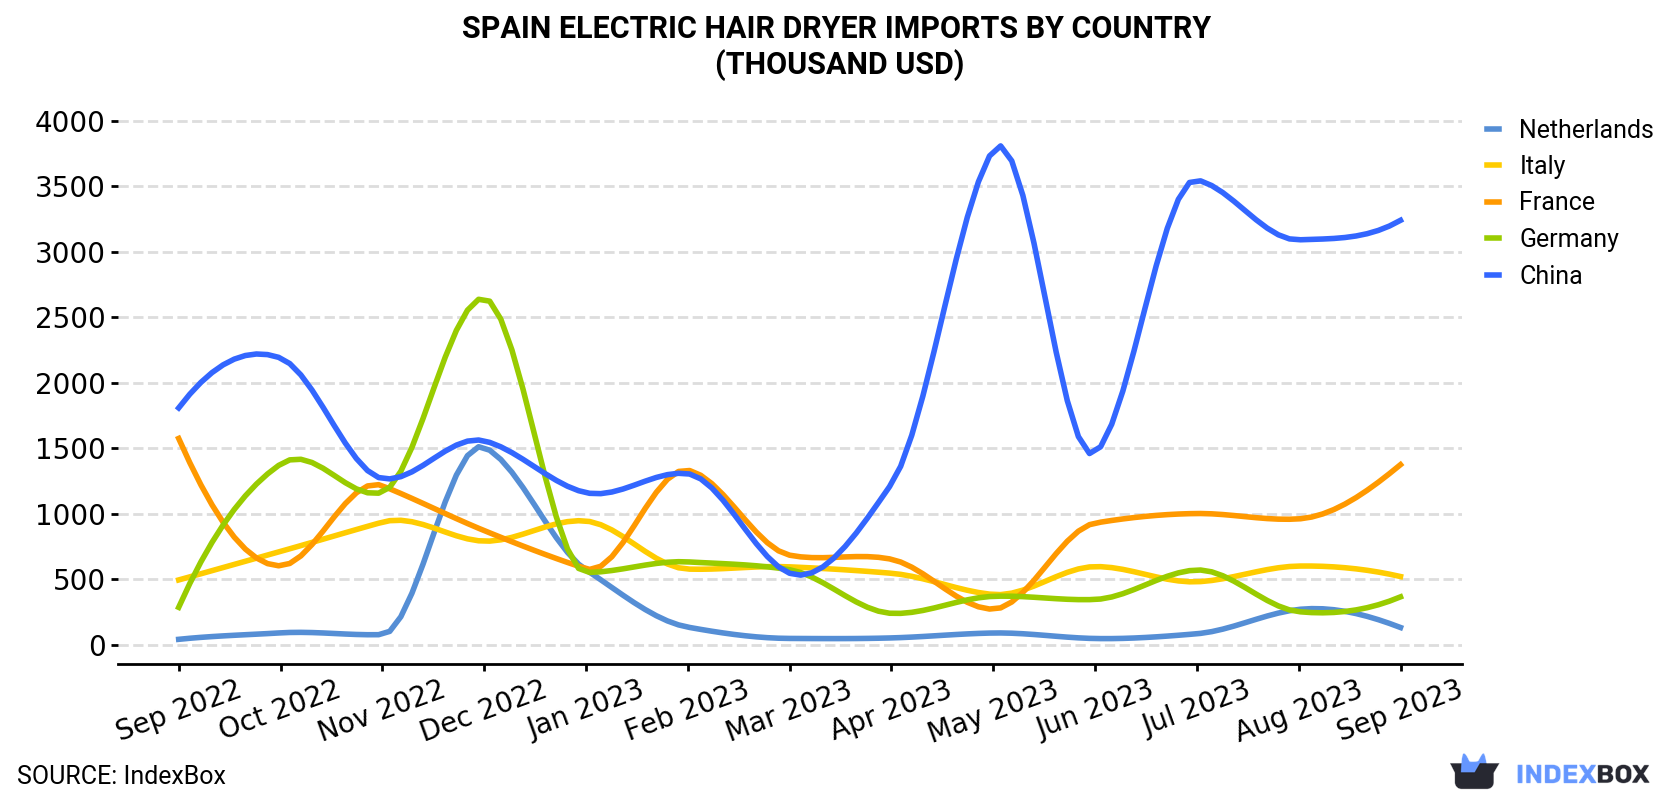 Spain Electric Hair Dryer Imports By Country (Thousand USD)